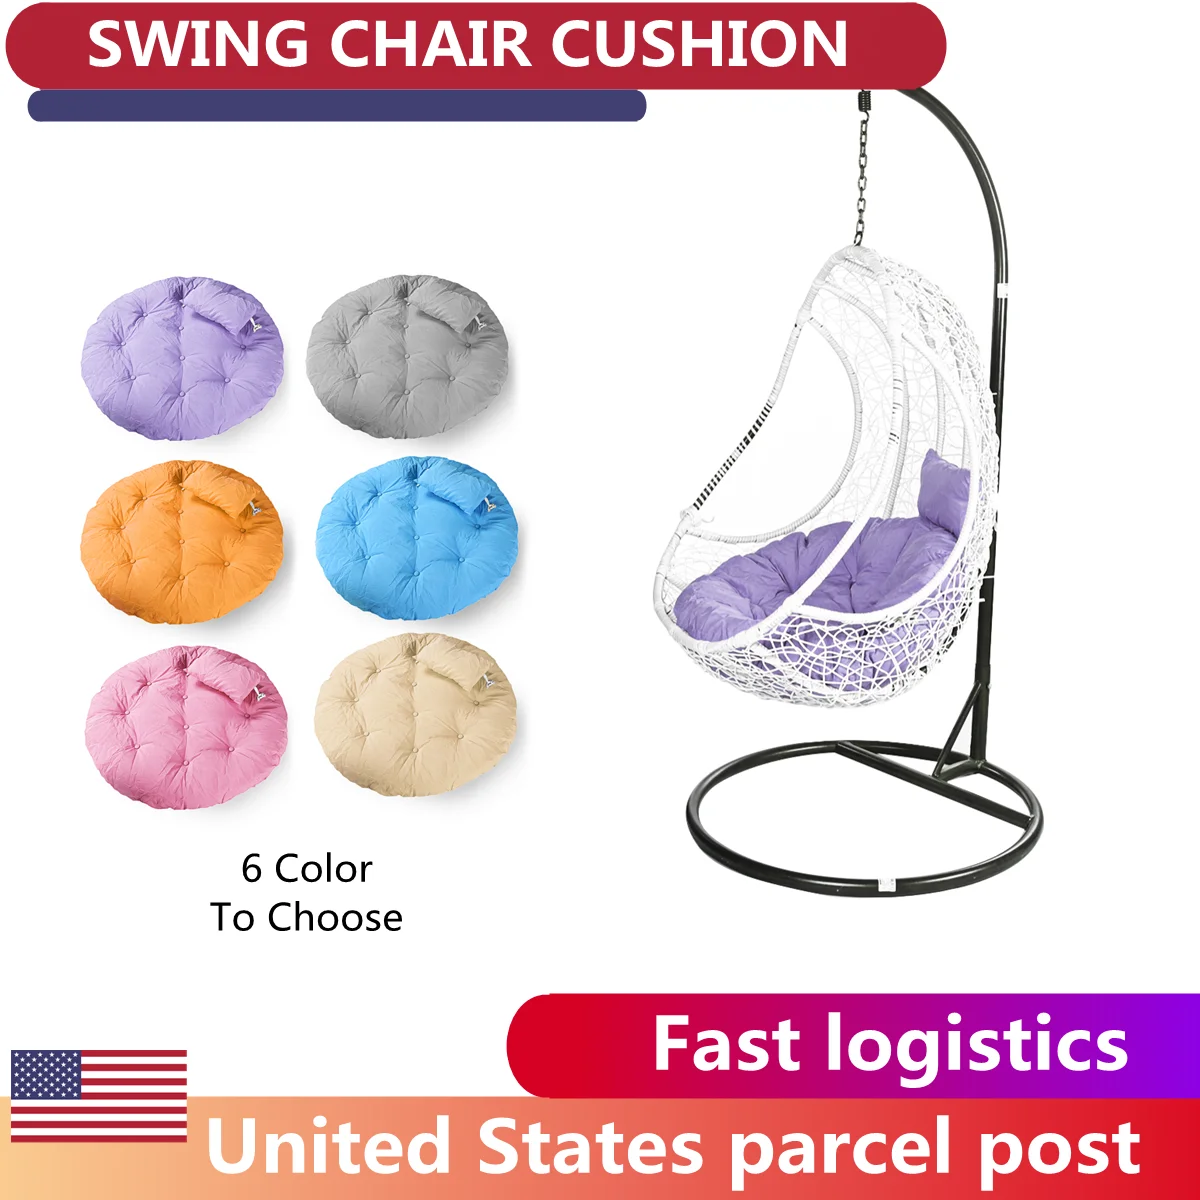 Hammock Chair Cushion Hanging Basket Seat Cushion Back Pillow For Swing Chairs Recliner Garden Chair Lounge Chair Rocking Chair